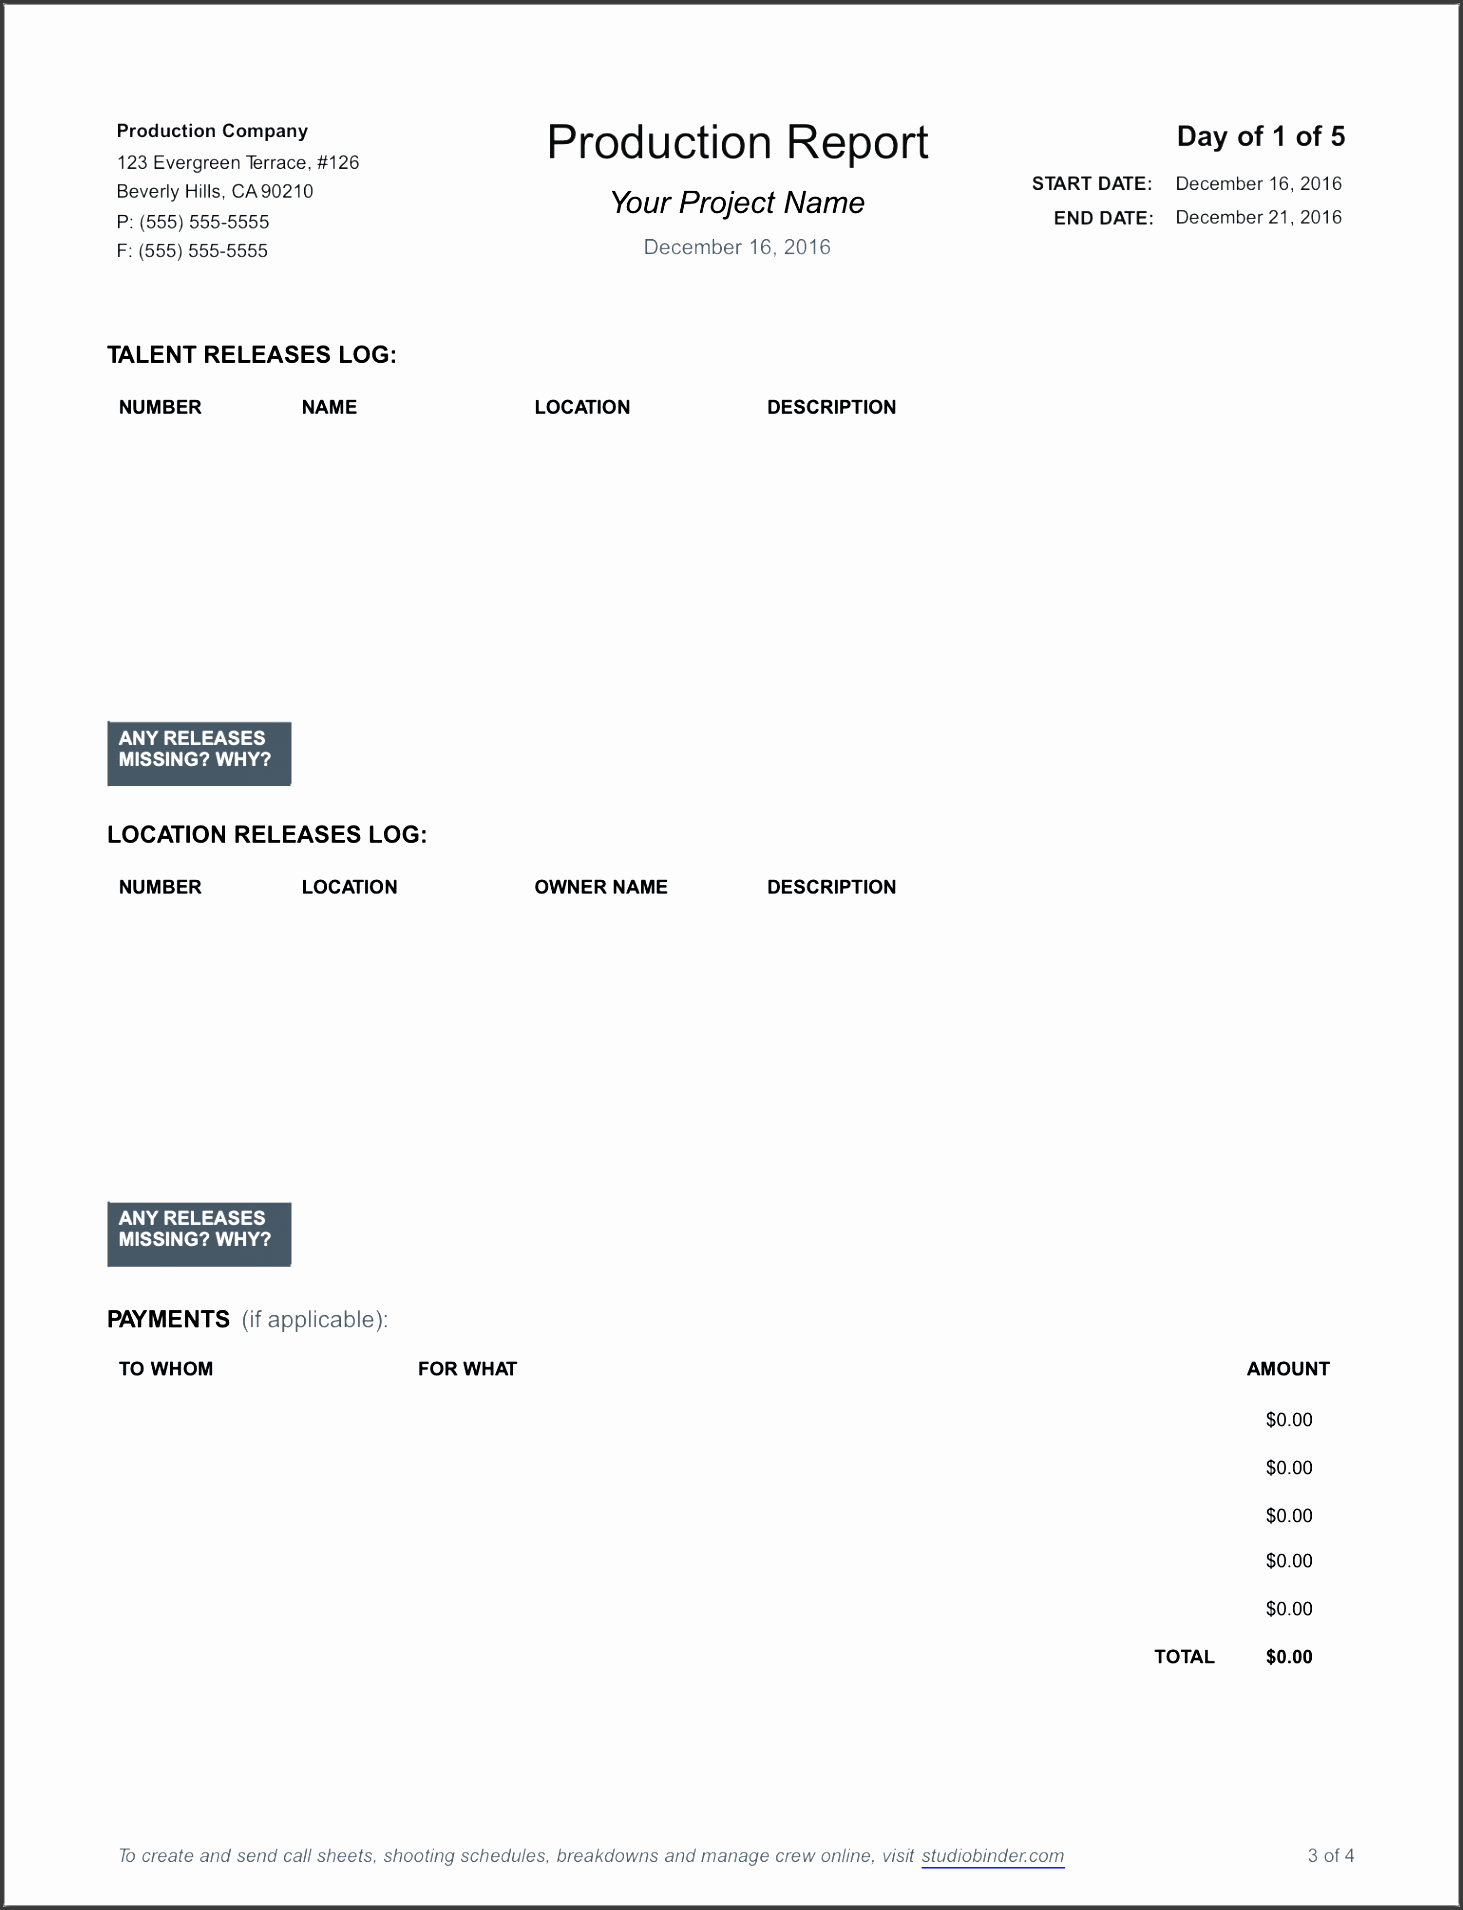 daily production report template page 3 studiobinder